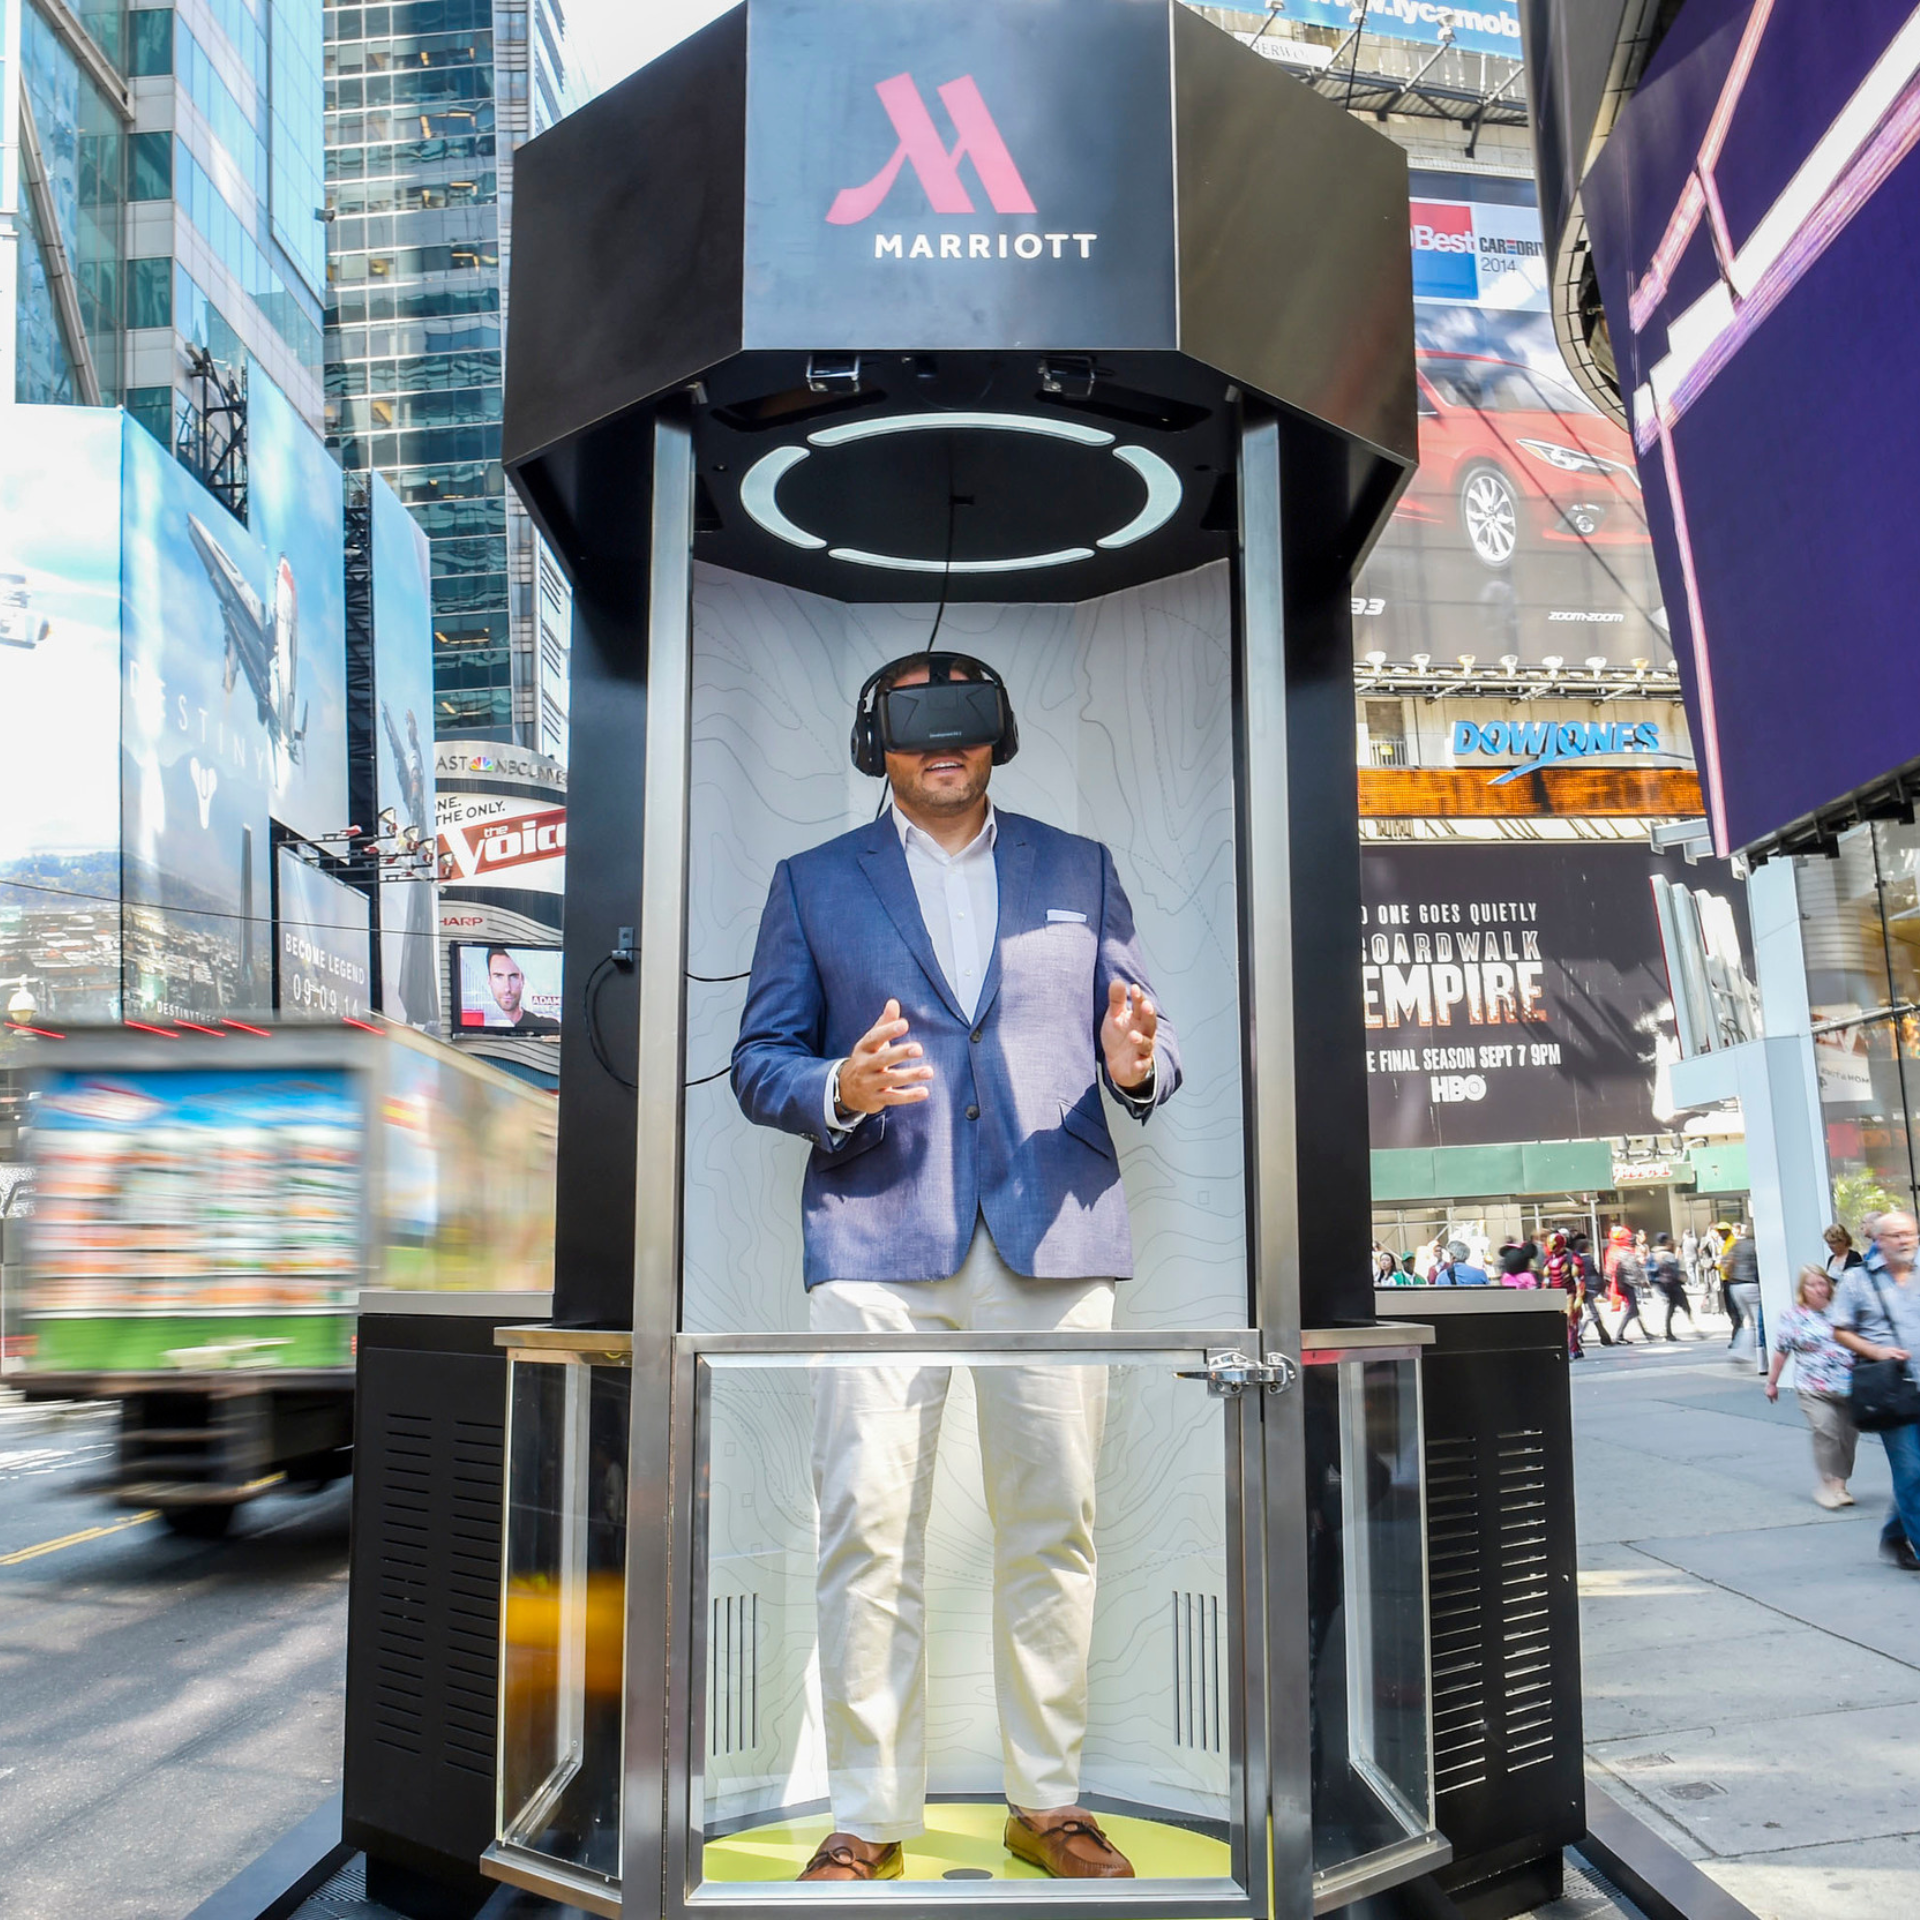 #GetTeleported: MARRIOTT VR TRAVEL EXPERIENCES